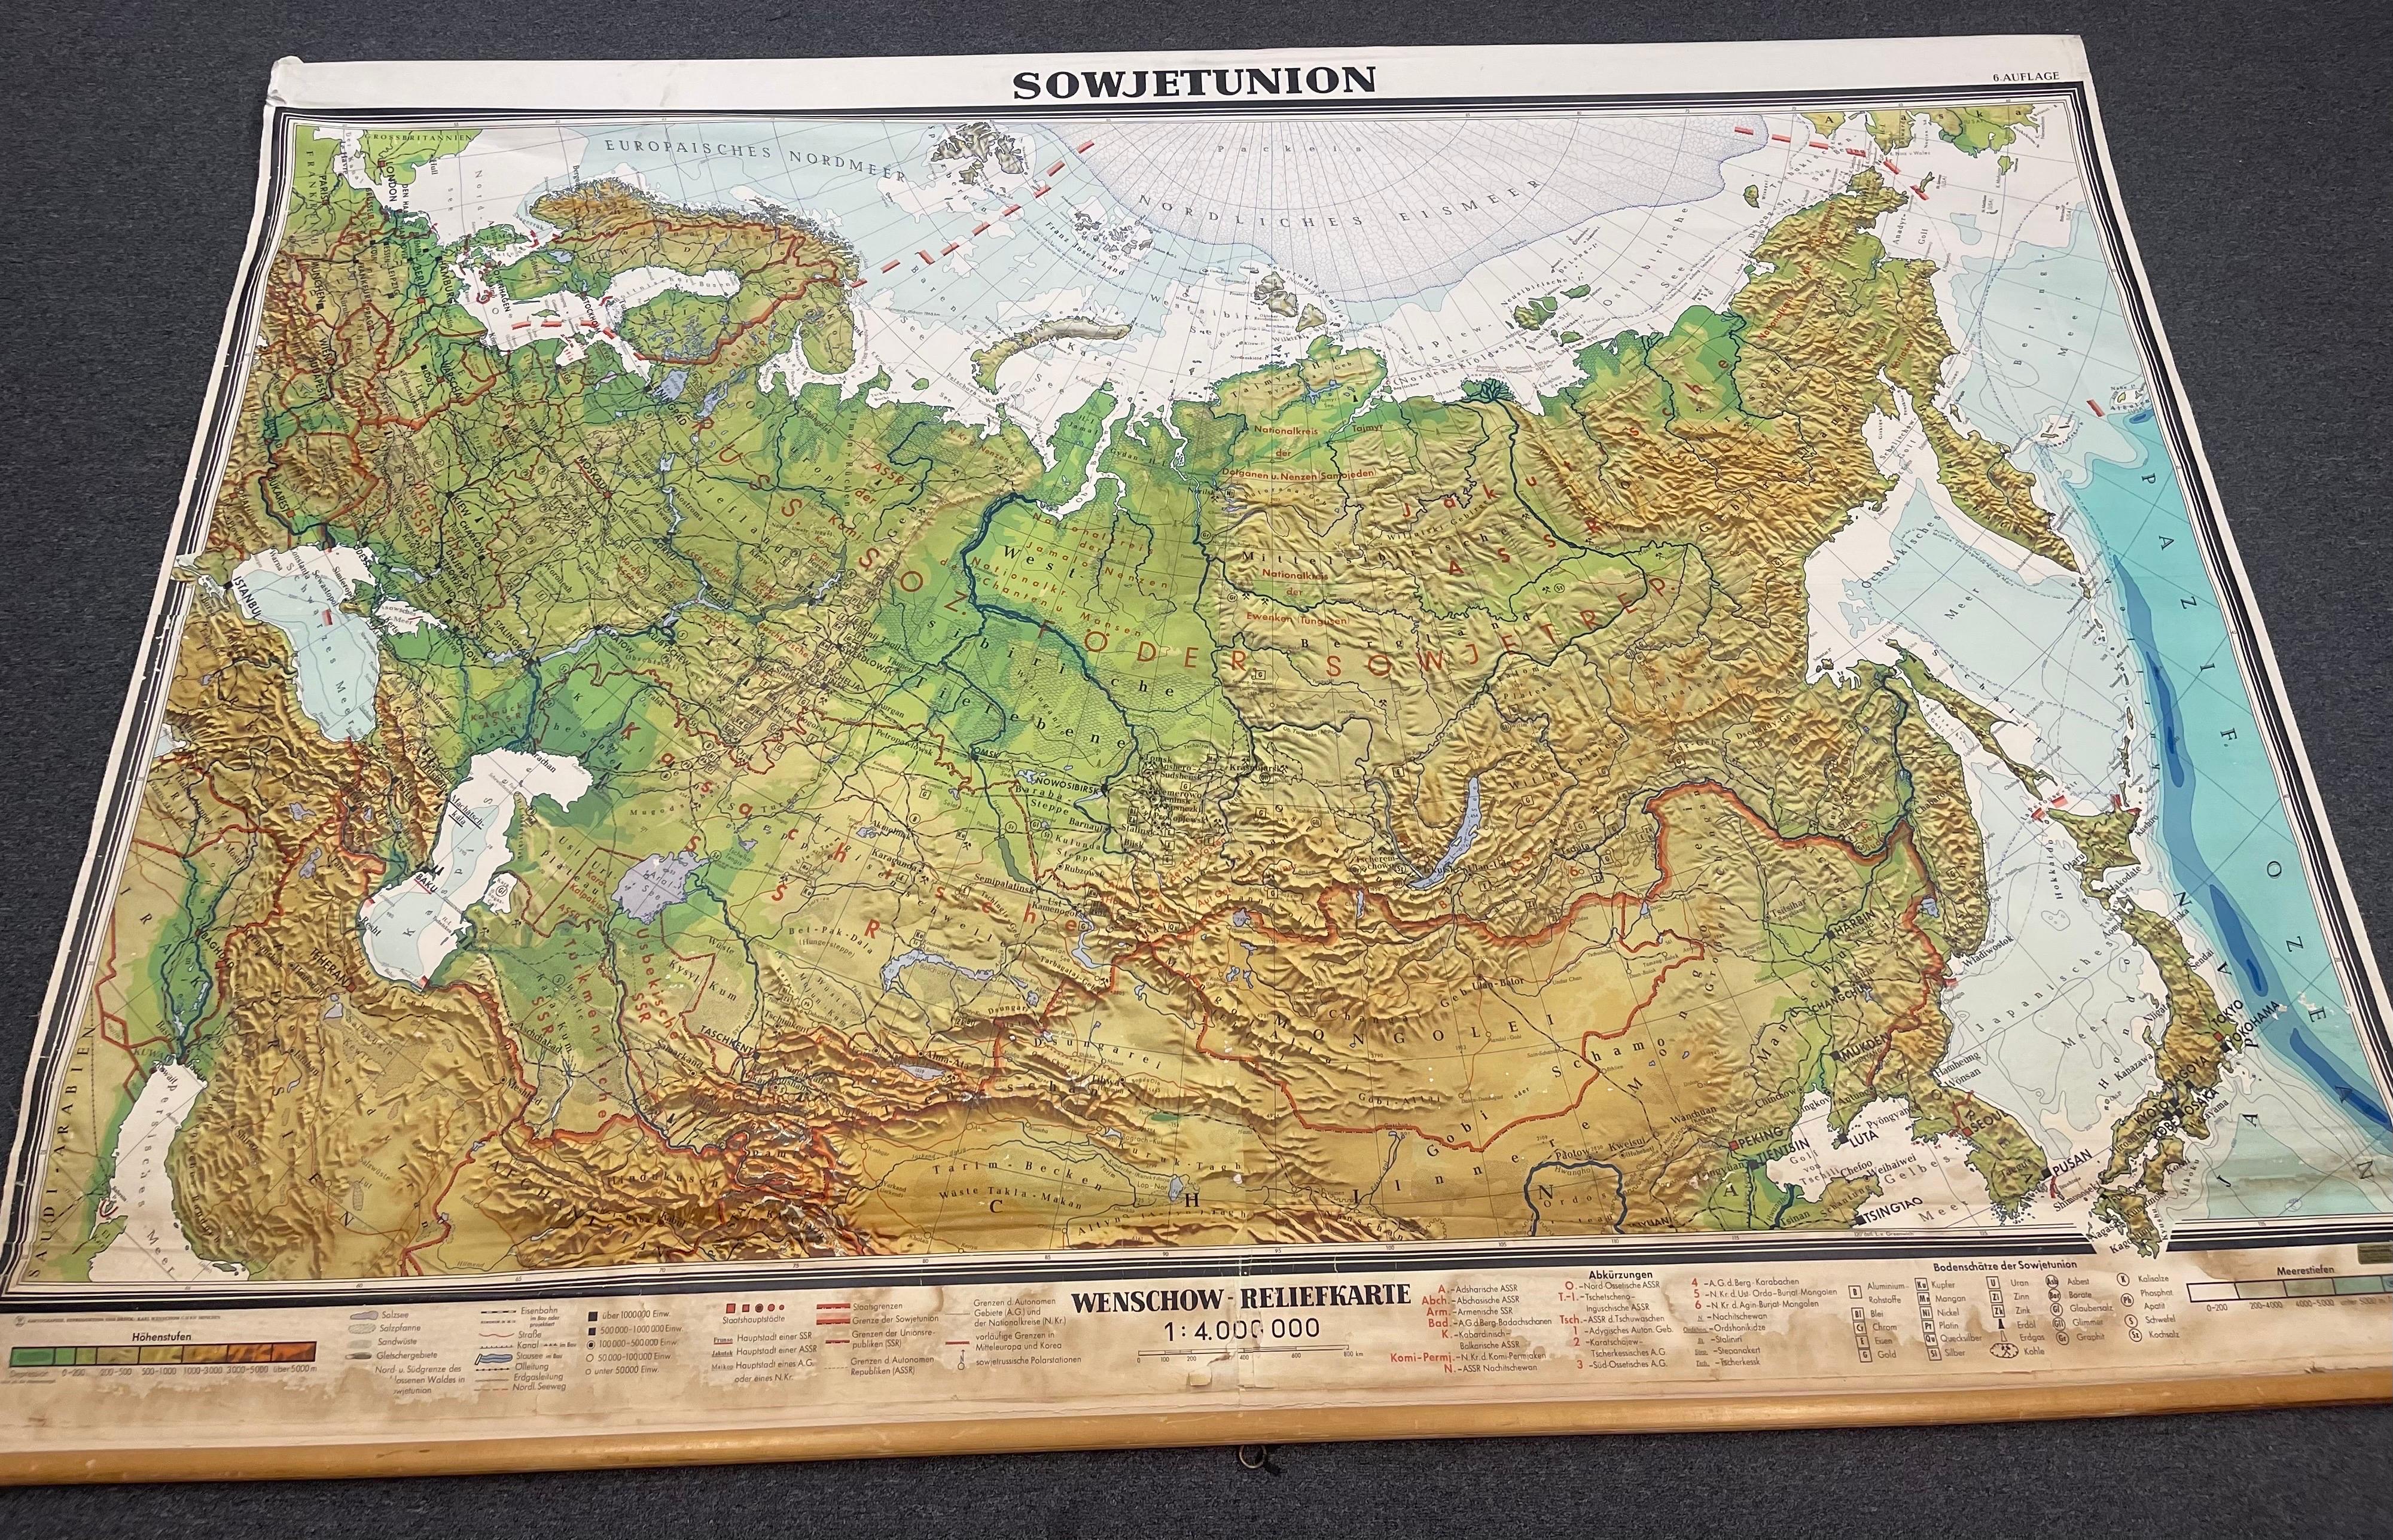 A massive vintage wall map of the Soviet Union (Sowjetunion) published by Karl Wenschow in Munich, Germany, circa 1950s. The map was distributed by Denoyer-Geppert and measures 96